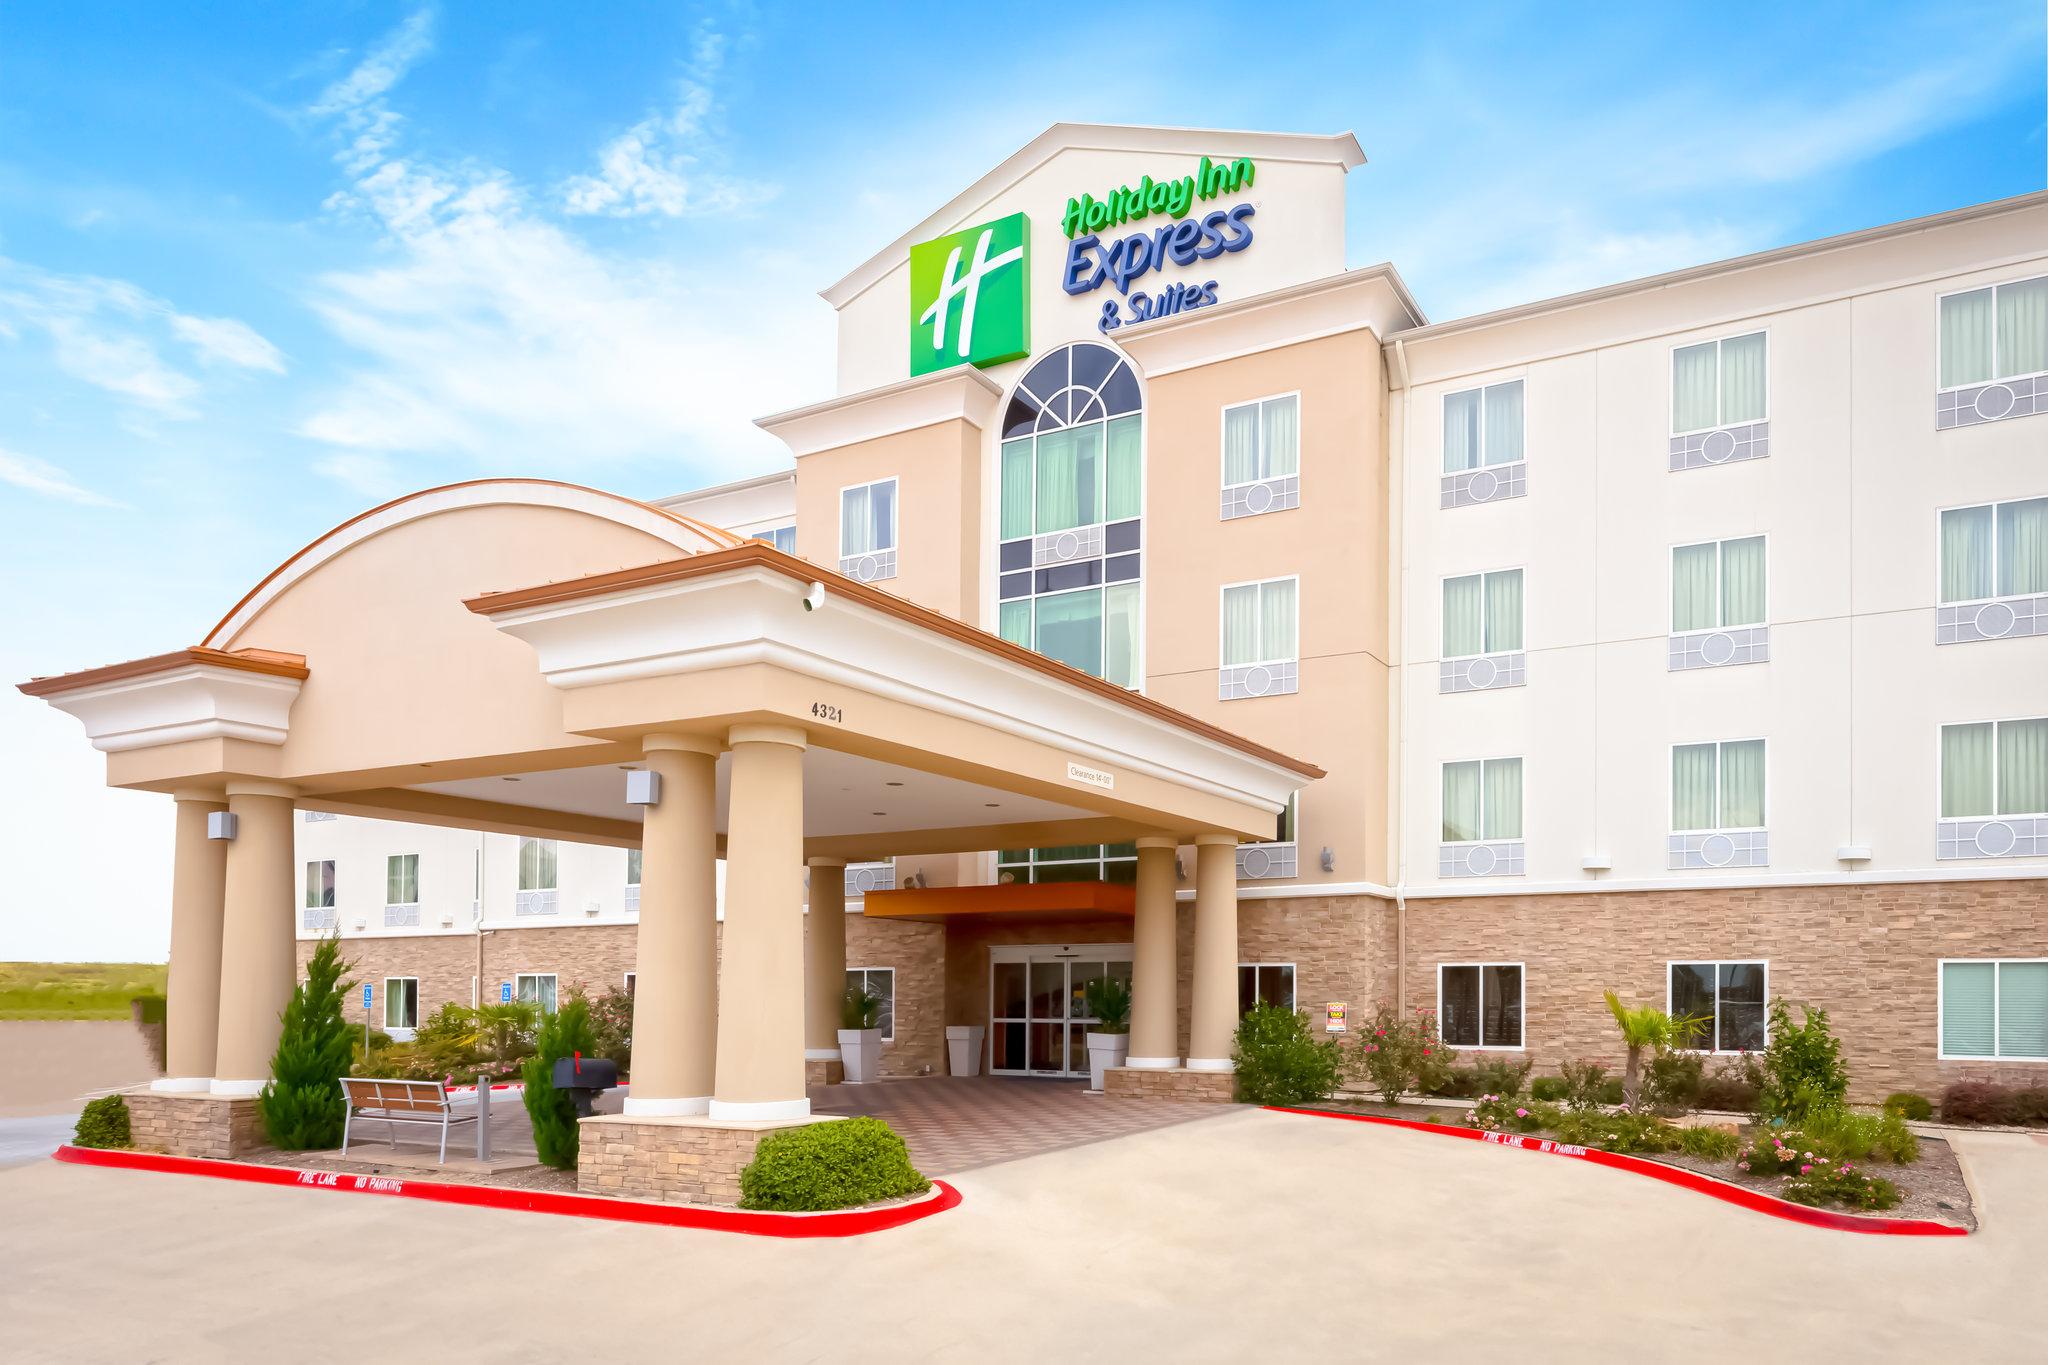 Holiday Inn Express & Suites Dallas W - I-30 Cockrell Hill in Dallas, TX